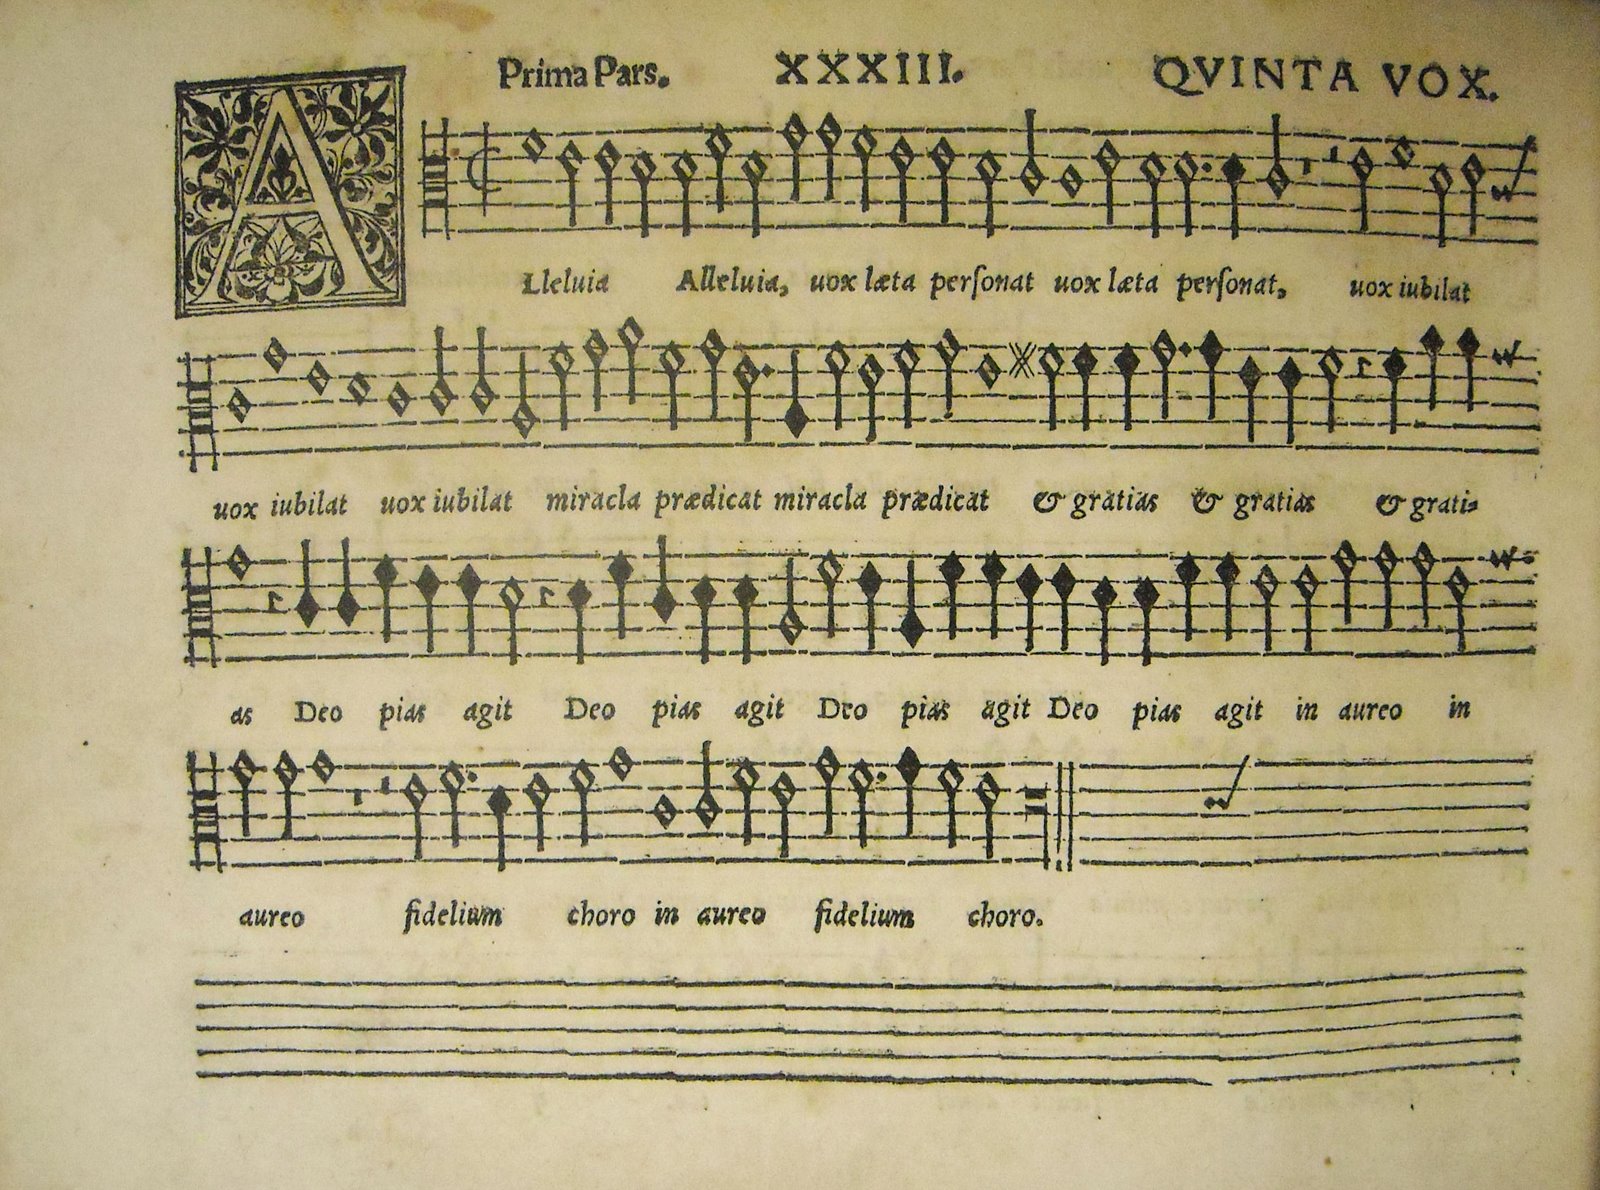 images of pages from these two partbooks showing the Alleluia, vox laeta with its original French title identifying its secular roots.